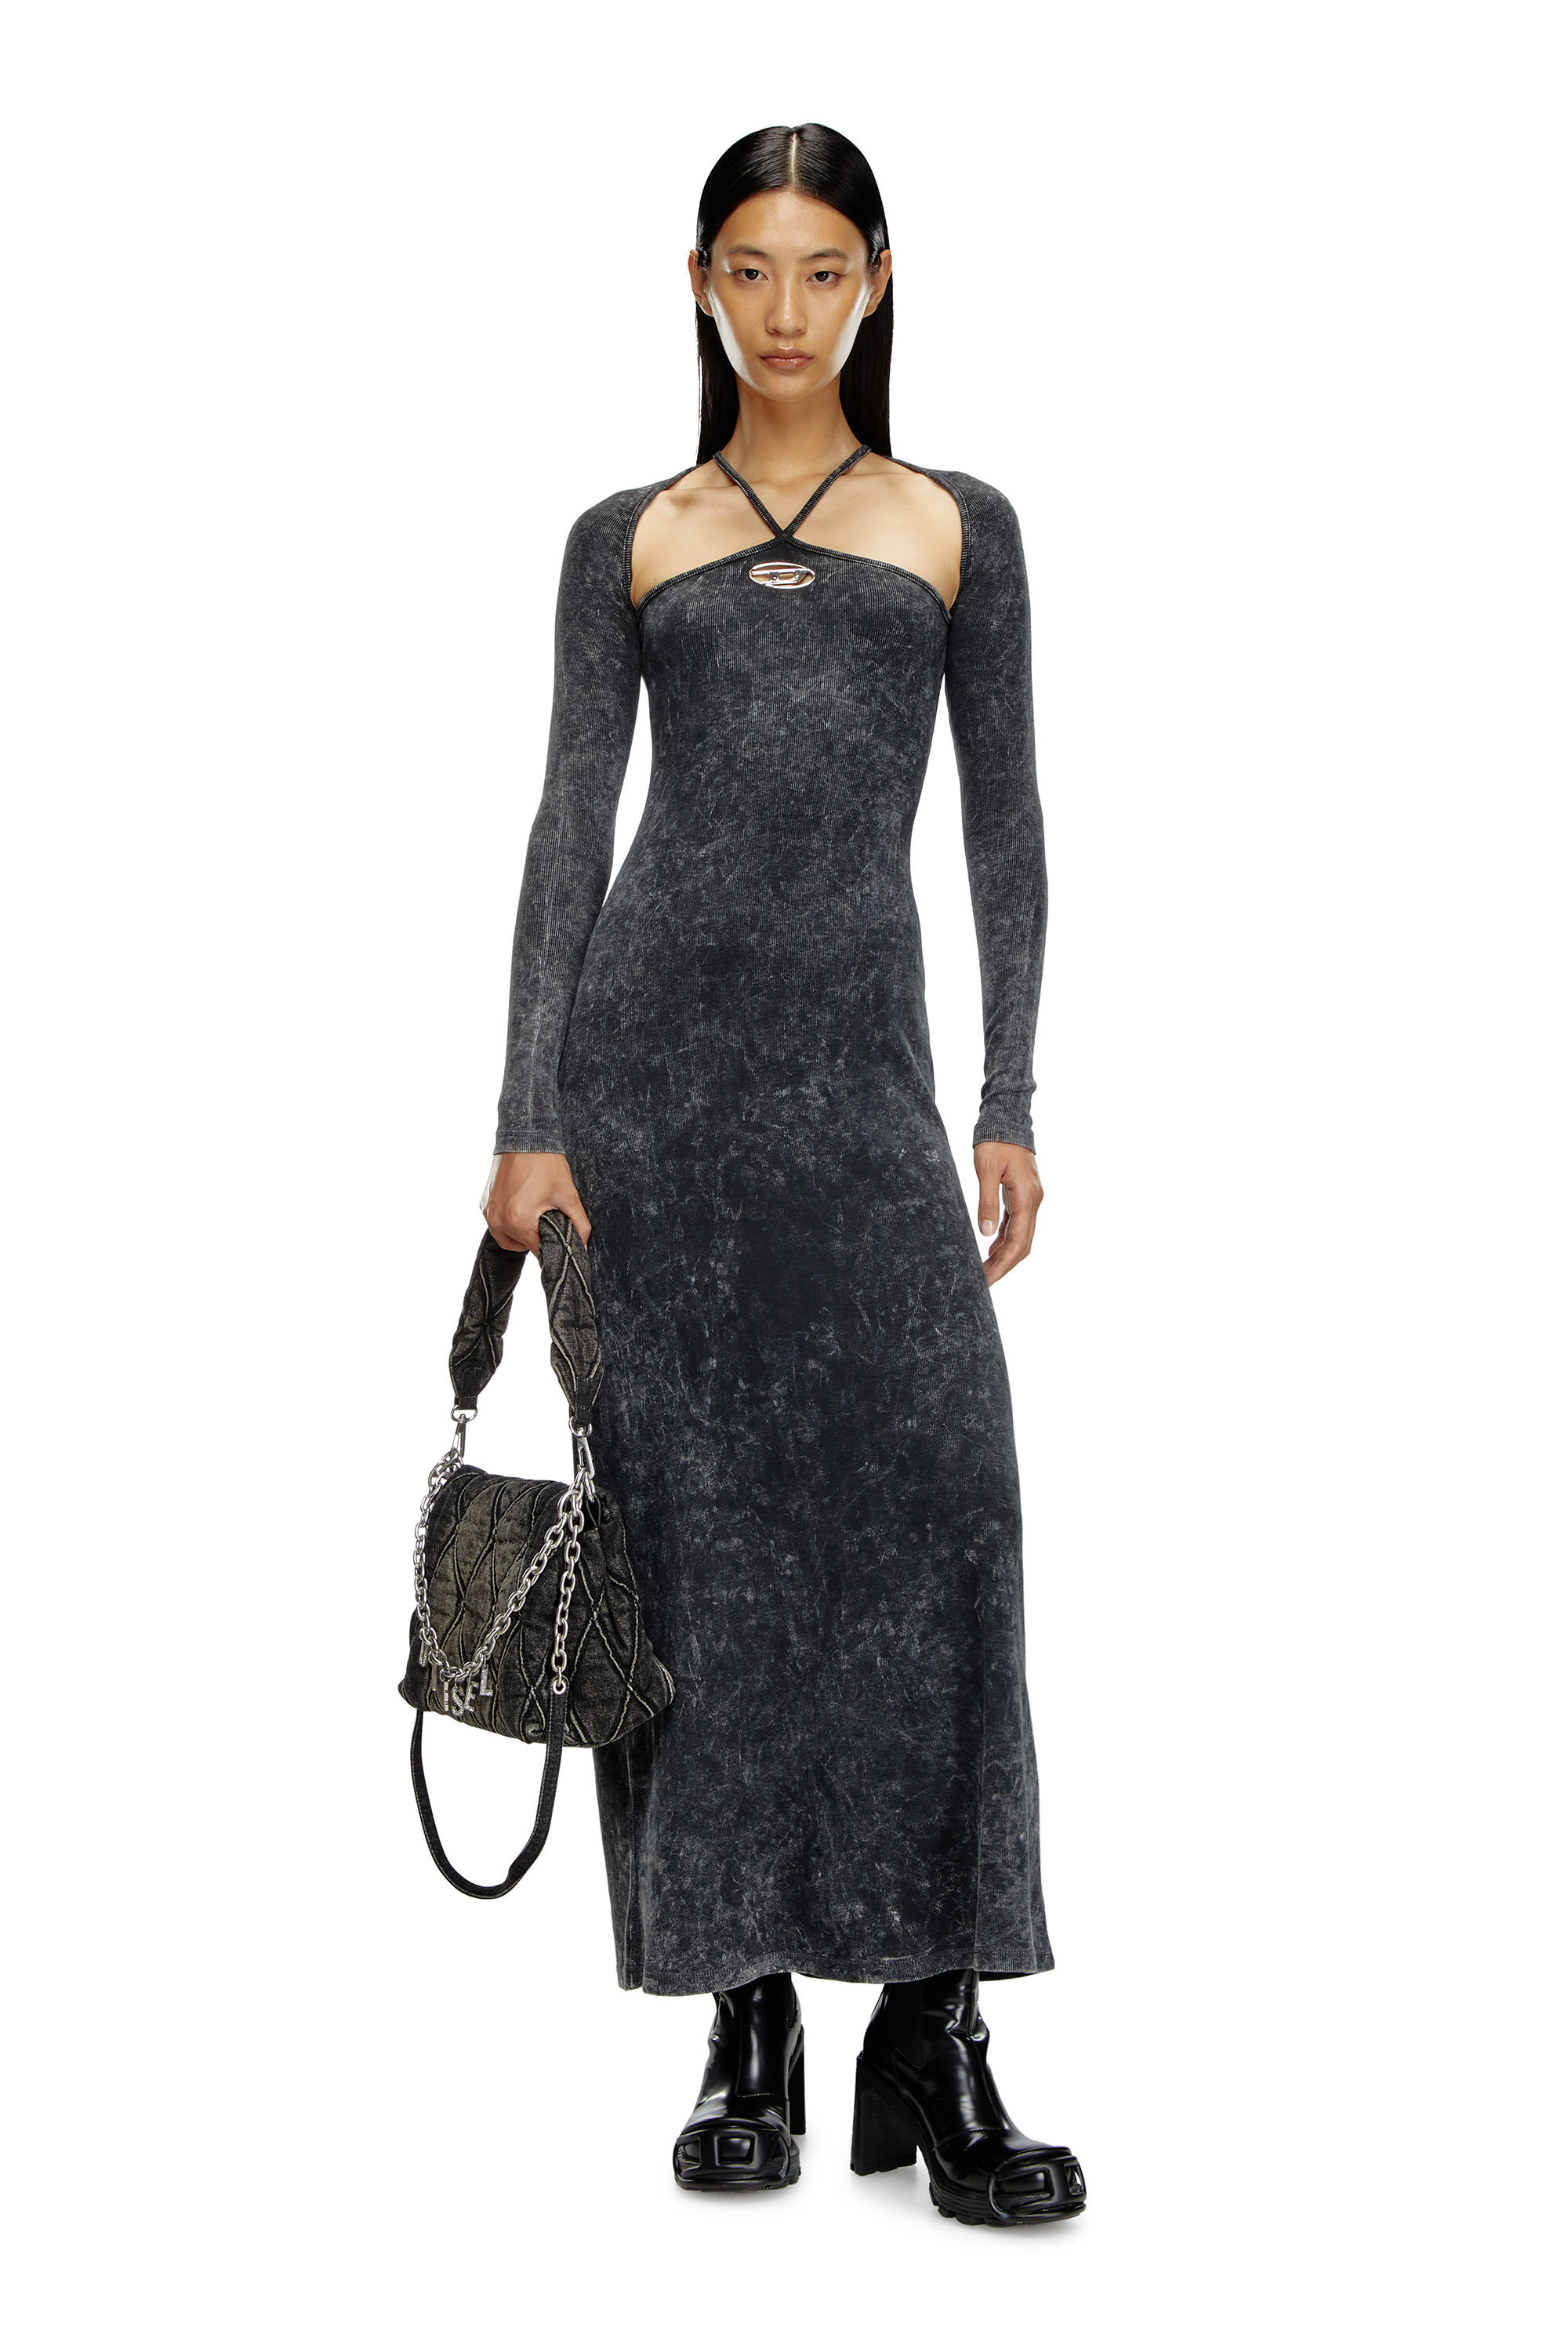 Diesel - D-MARINEL, Woman Long dress with marbled effect in Black - Image 1